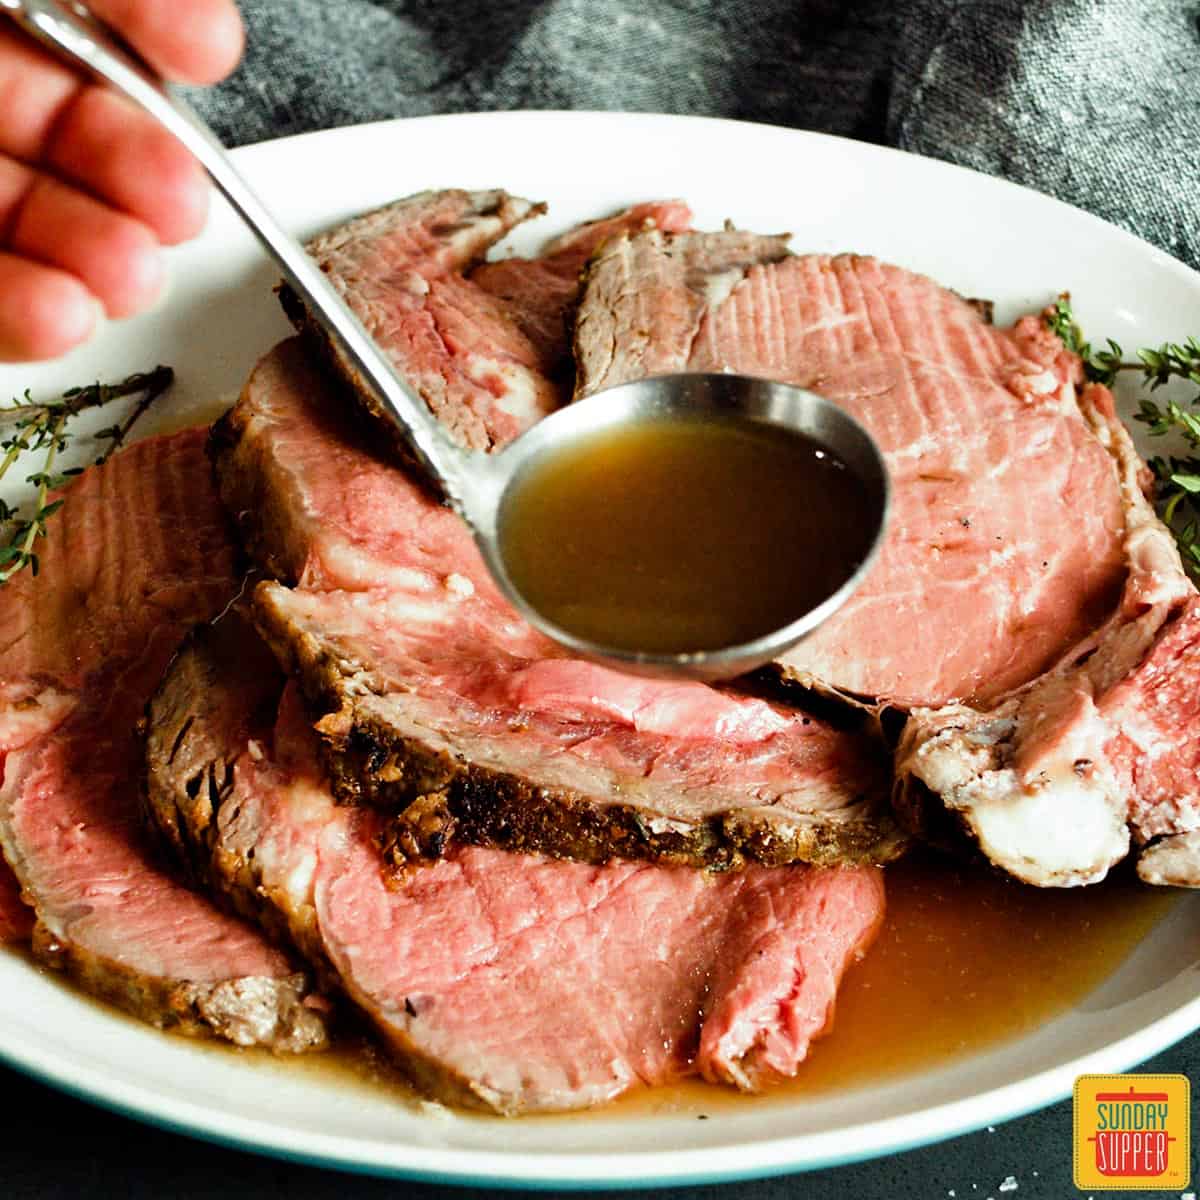 Pouring au jus over slices of prime rib on a white plate